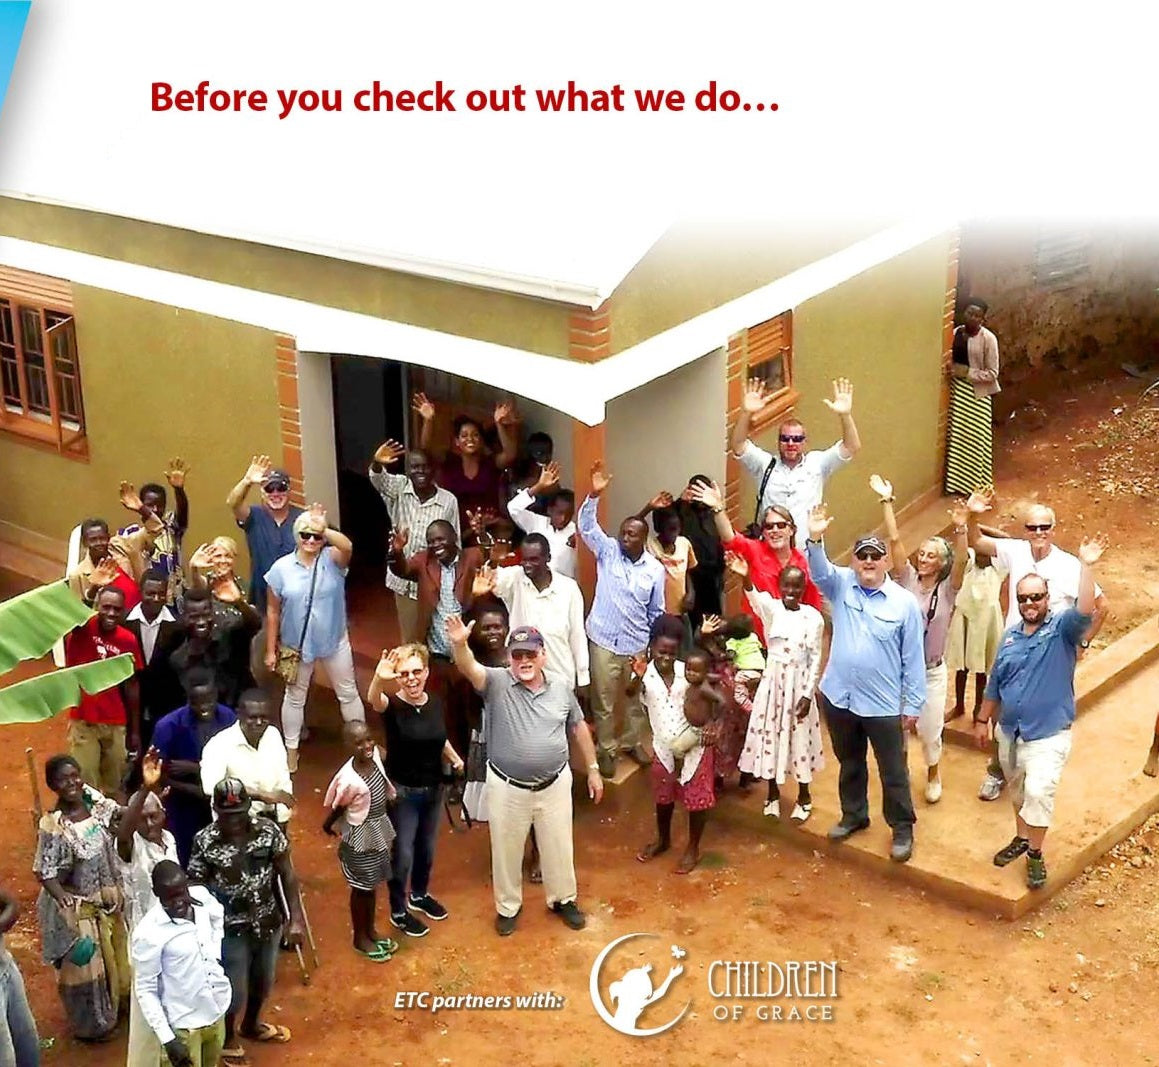 SAFE-T-PROOF™ charity work with Children of Grace